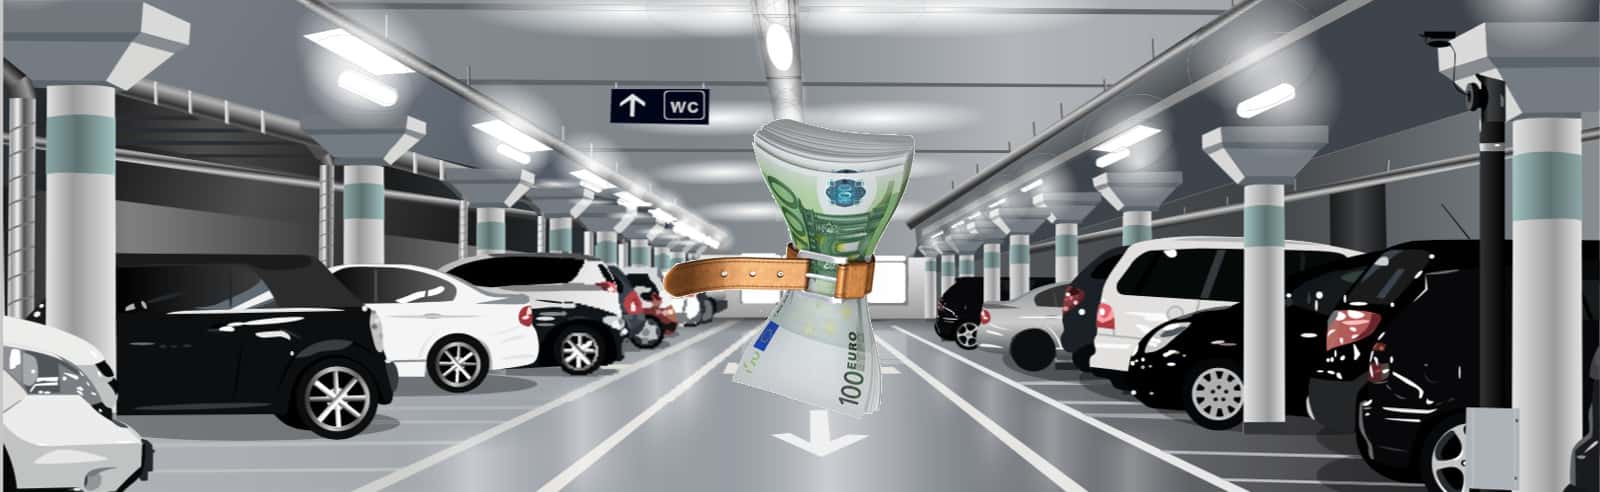 Where to park in Zaventem? It is super easy with MyflexiPark!